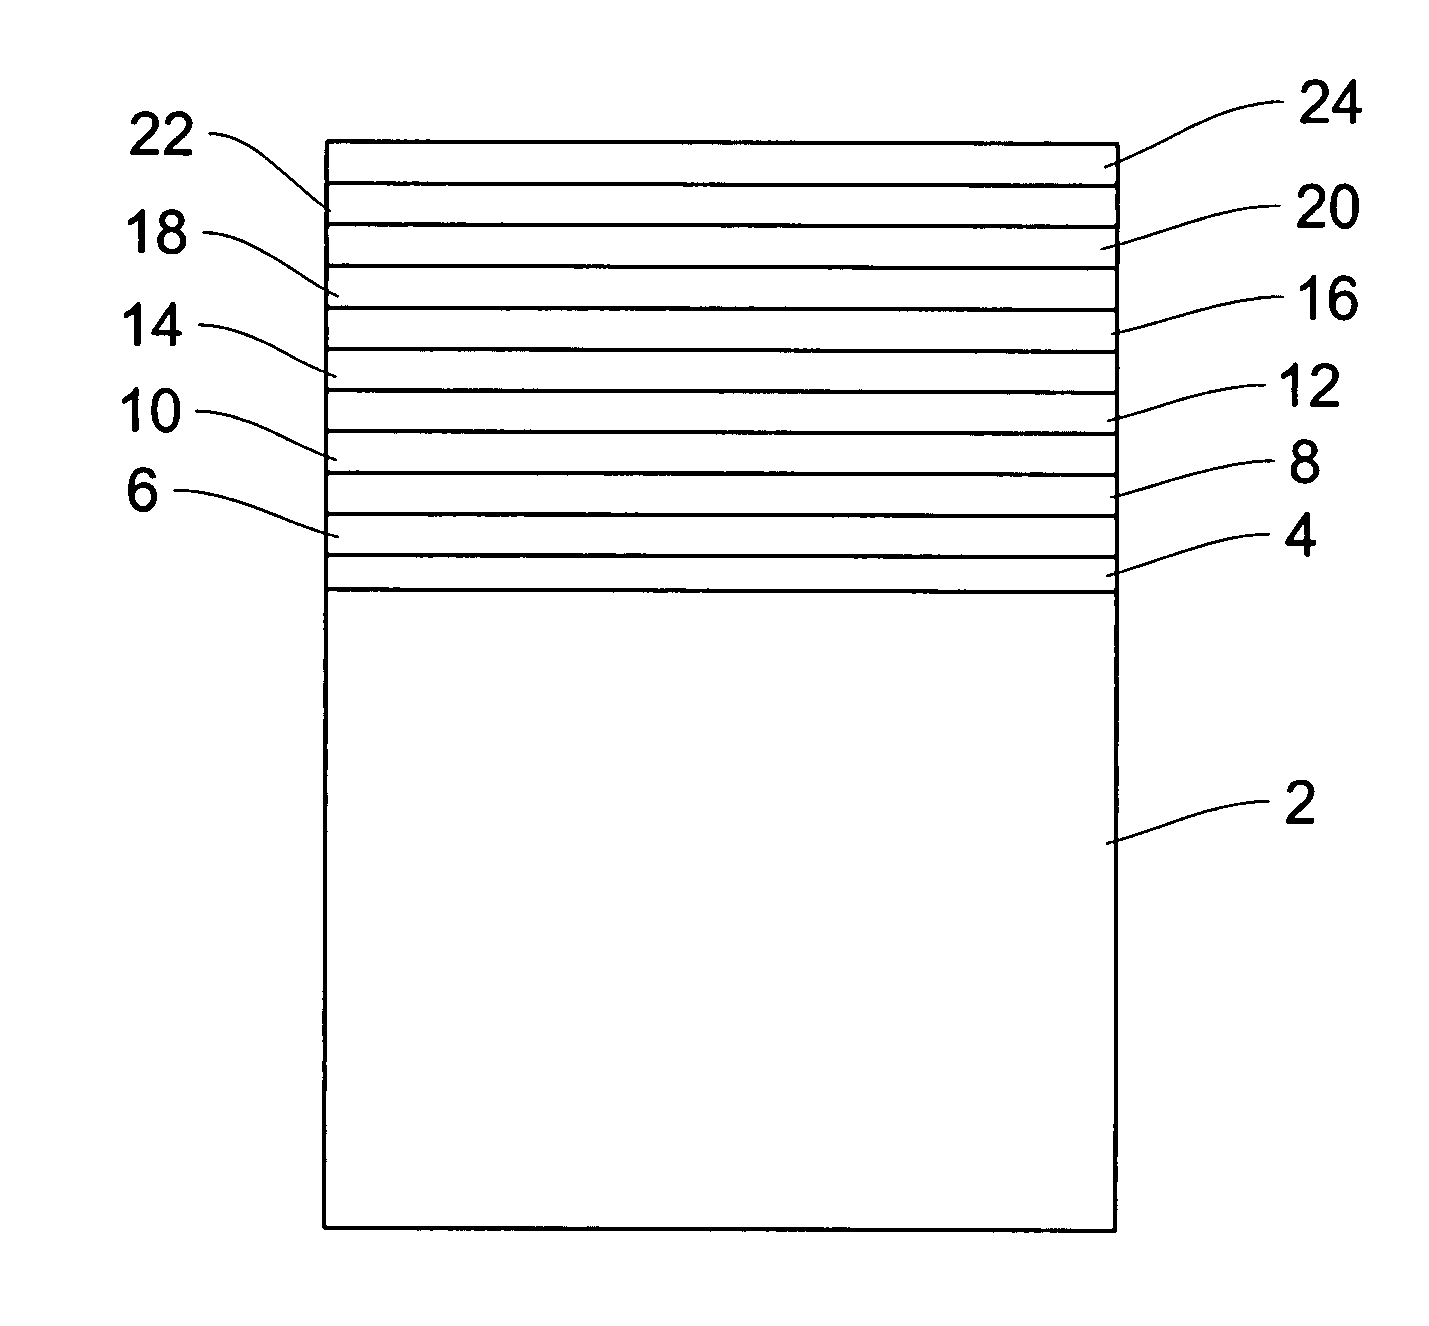 Structure of high power edge emission laser diode